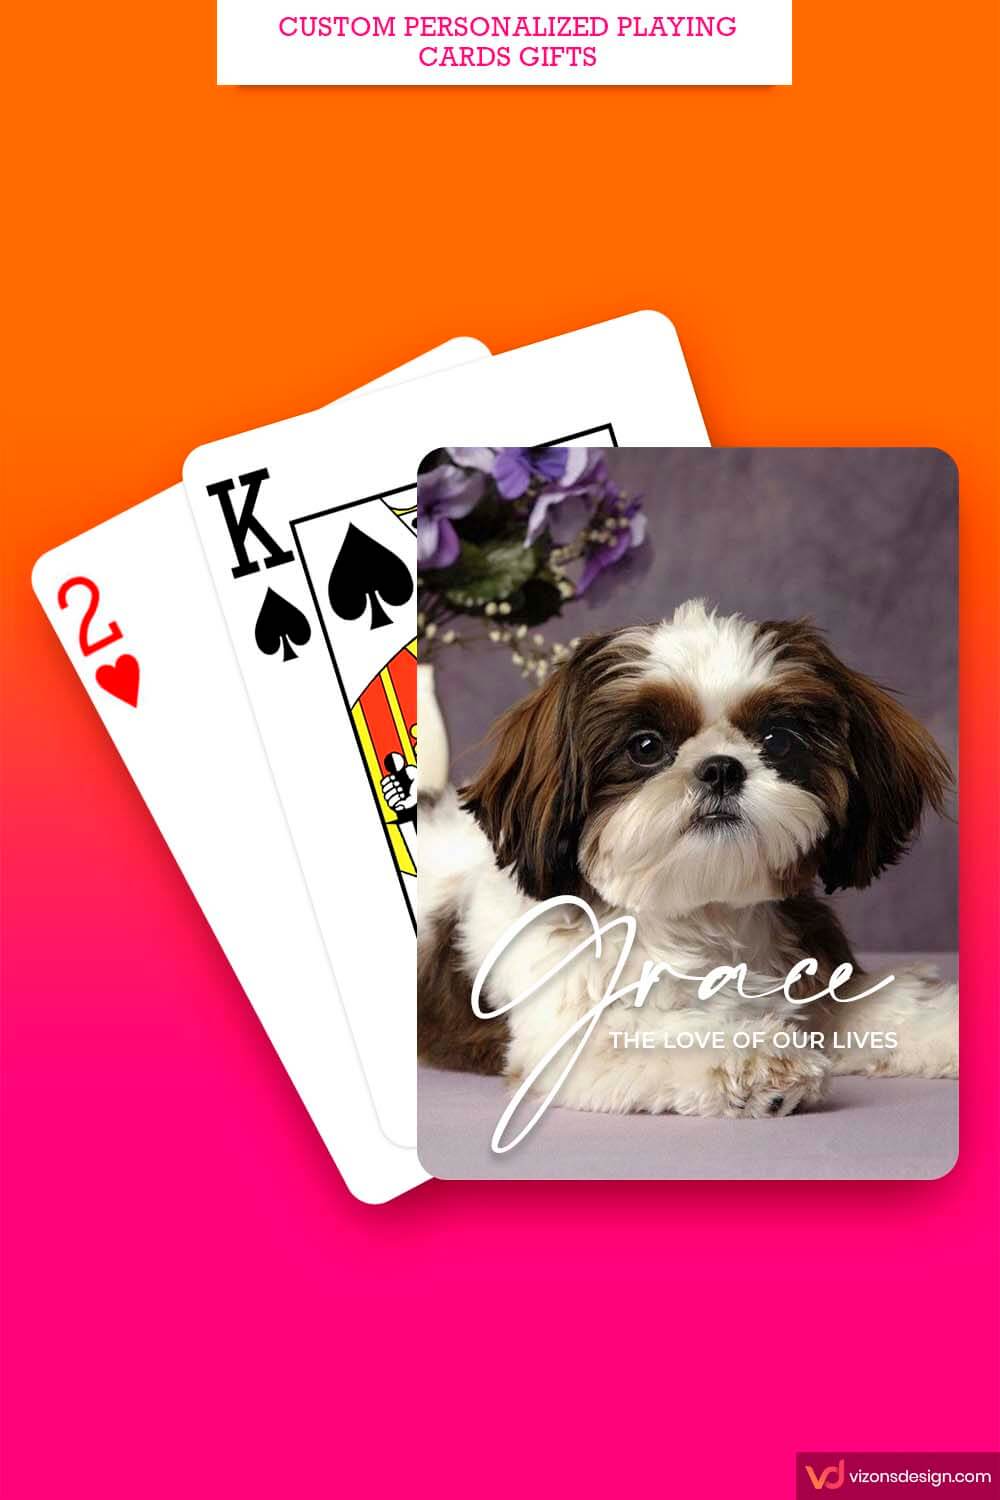 Personalized Playing Cards Gifts For Everyone